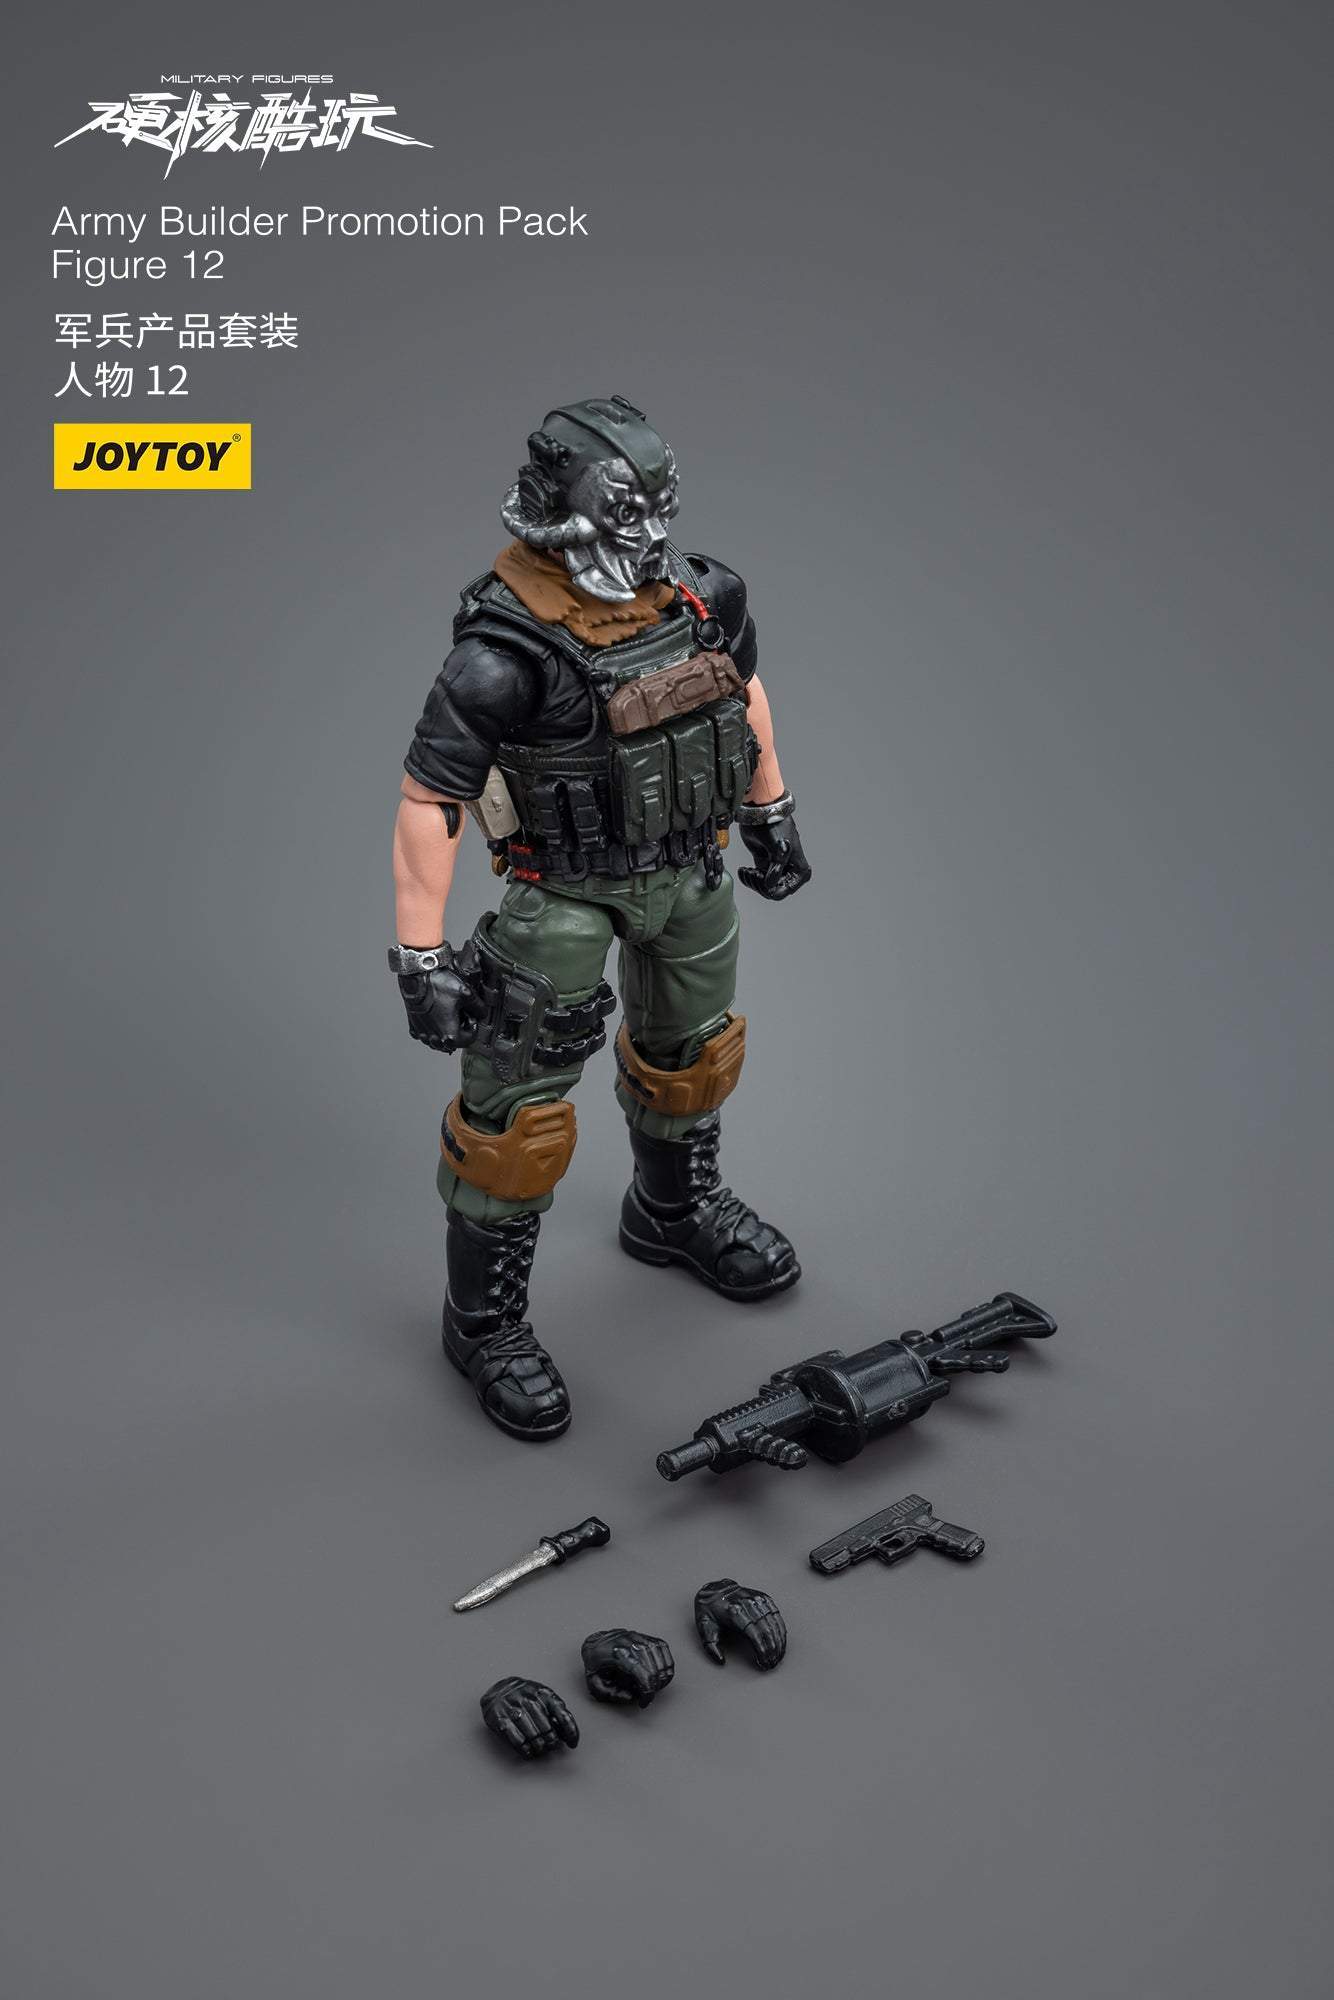 Army Builder Promotion Pack Figure 12